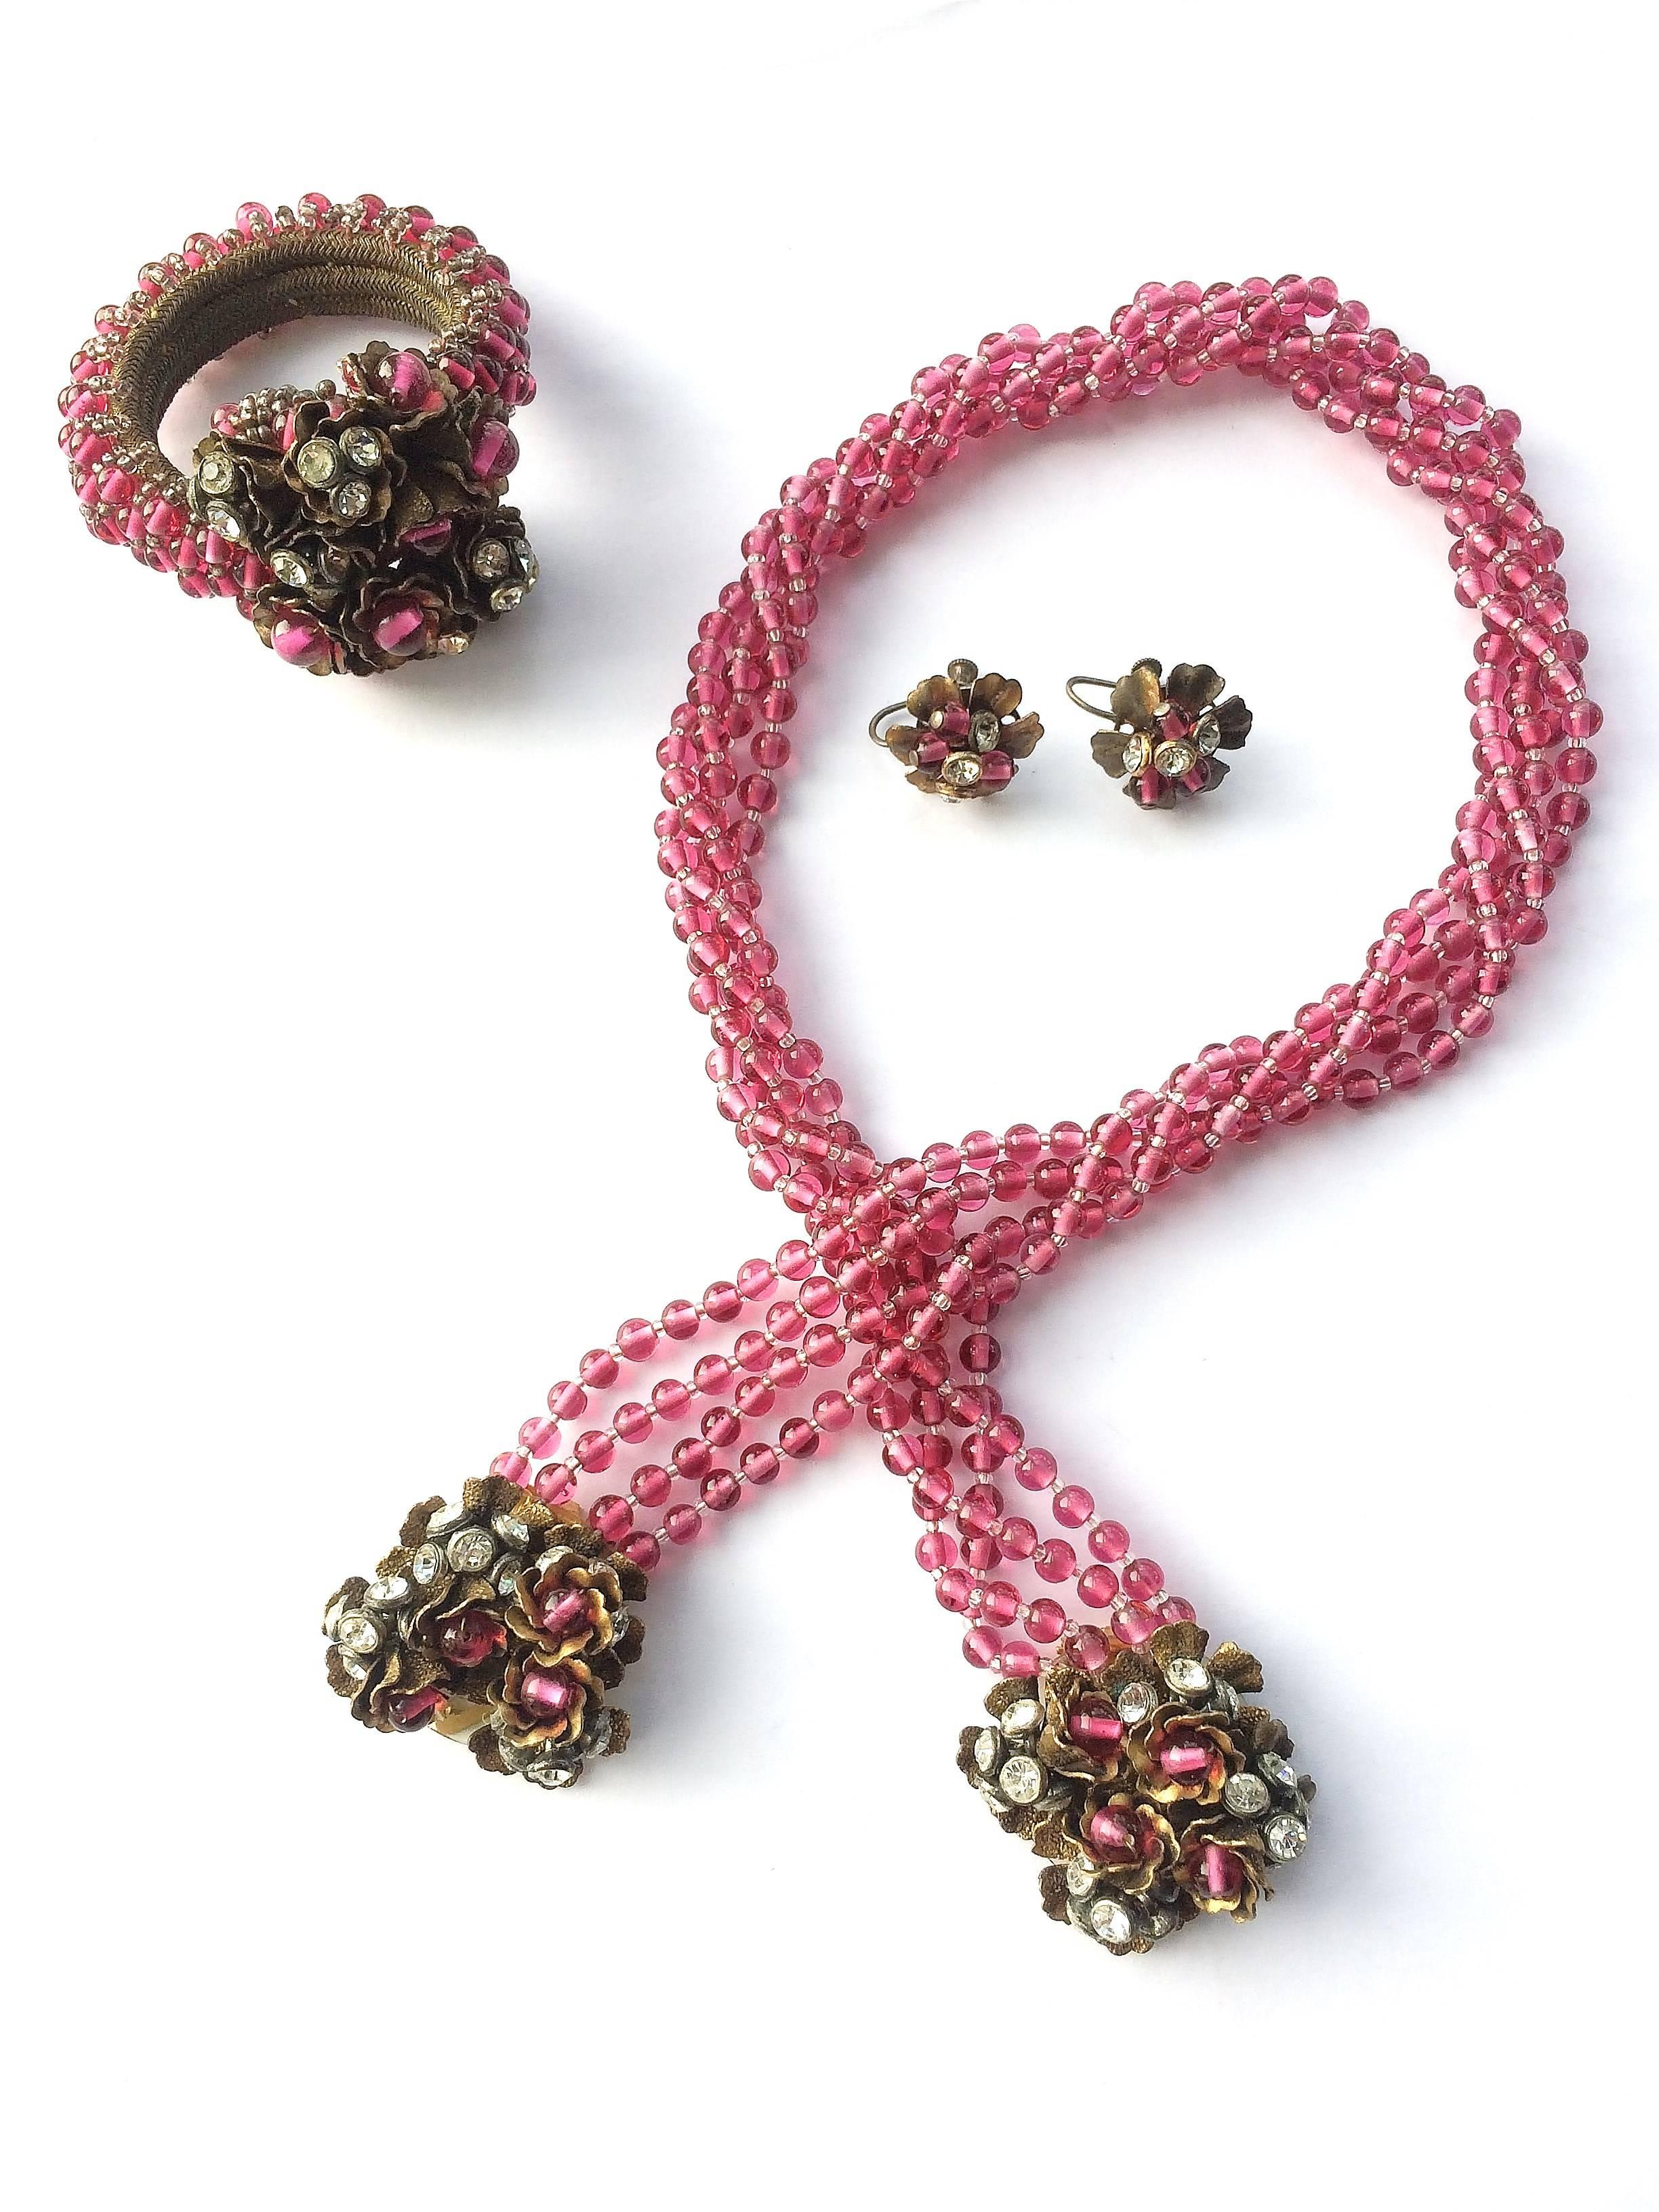 Beautiful three piece parure (wraparound necklace with jewelled terminals, wraparound bracelet and matching earrings), a iconic design from the 1930s by Miriam Haskell. In soft cranberry pate de verre glass, the necklace wraps round the neck, the